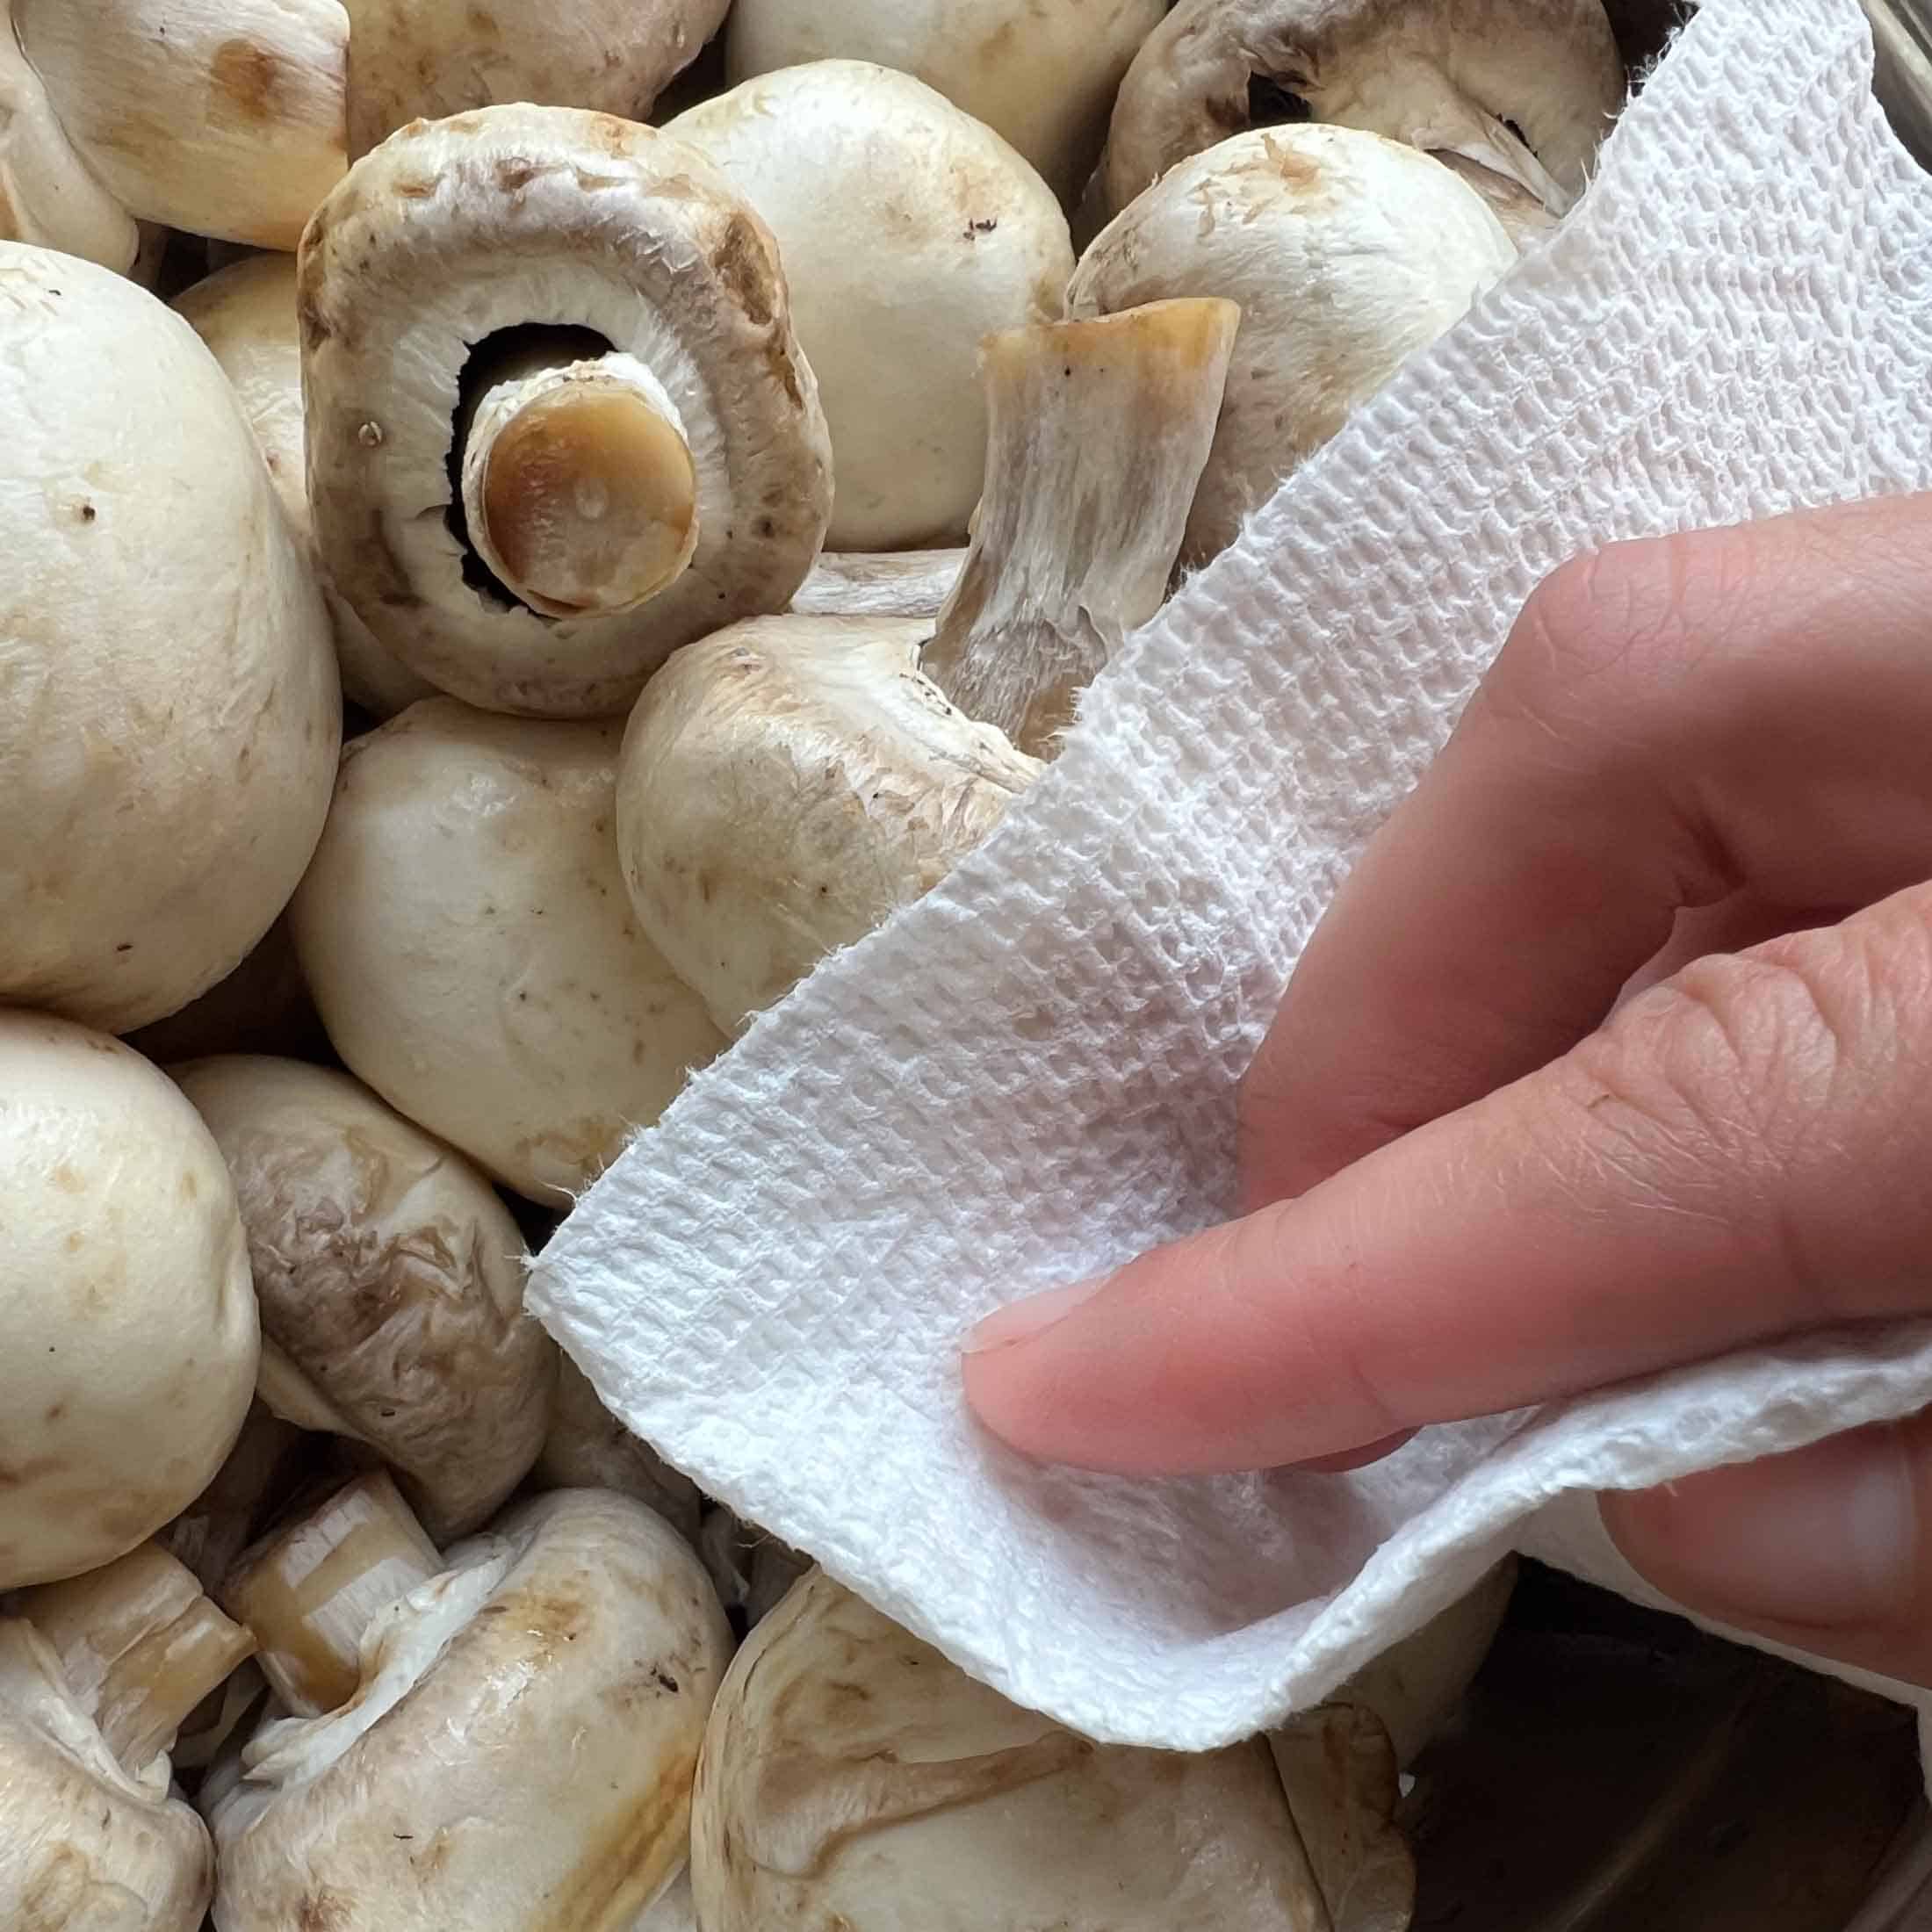 White mushrooms being patted dry with a paper towel.